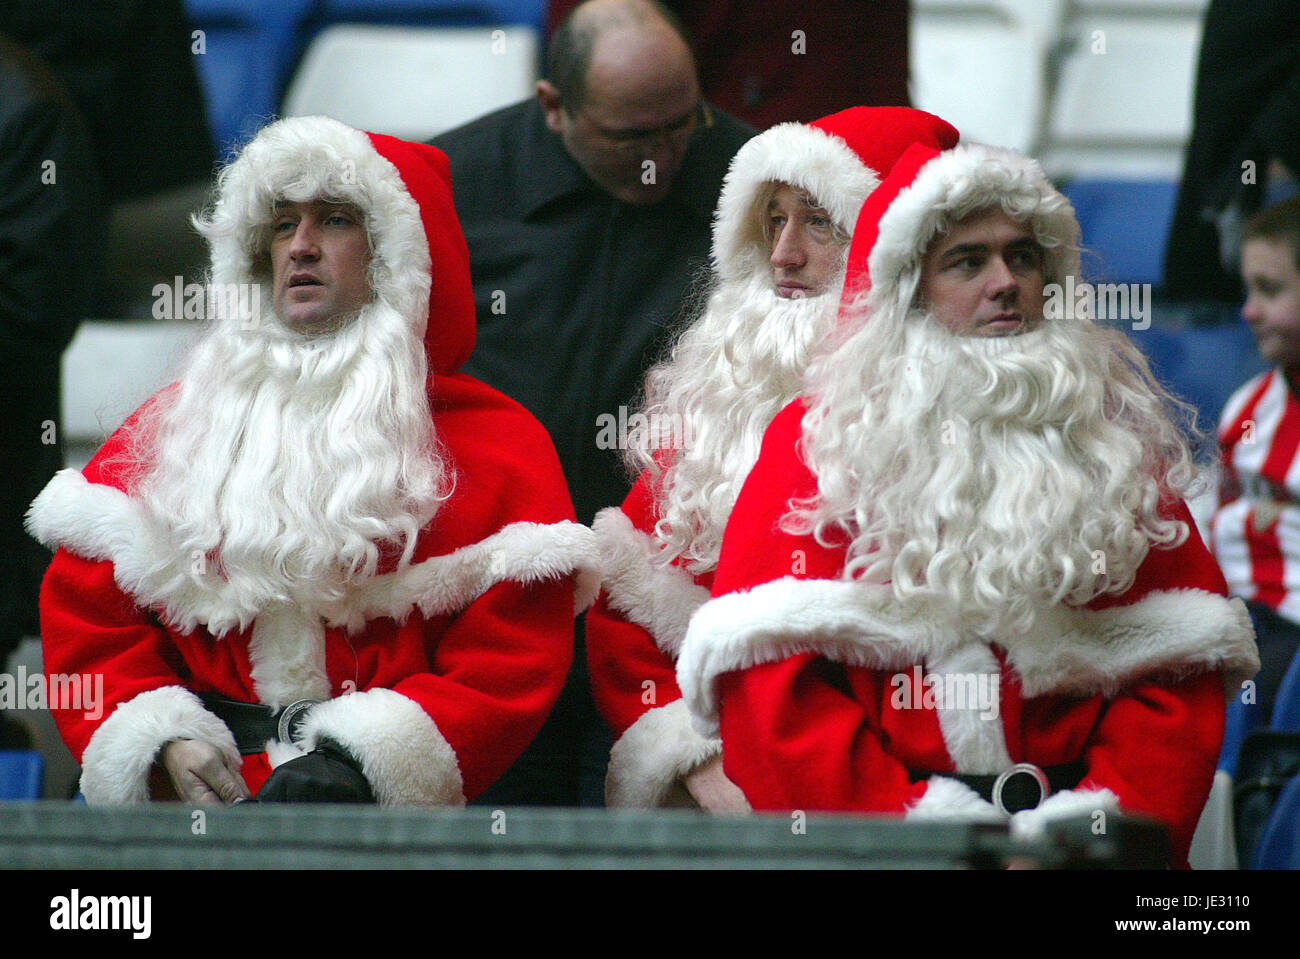 FANS IN SANTA CLAUSE OUTFITS WEST BROMWICH A V SUNDERLAND THE HAWTHORNS WEST BROMICH 21 December 2002 Stock Photo